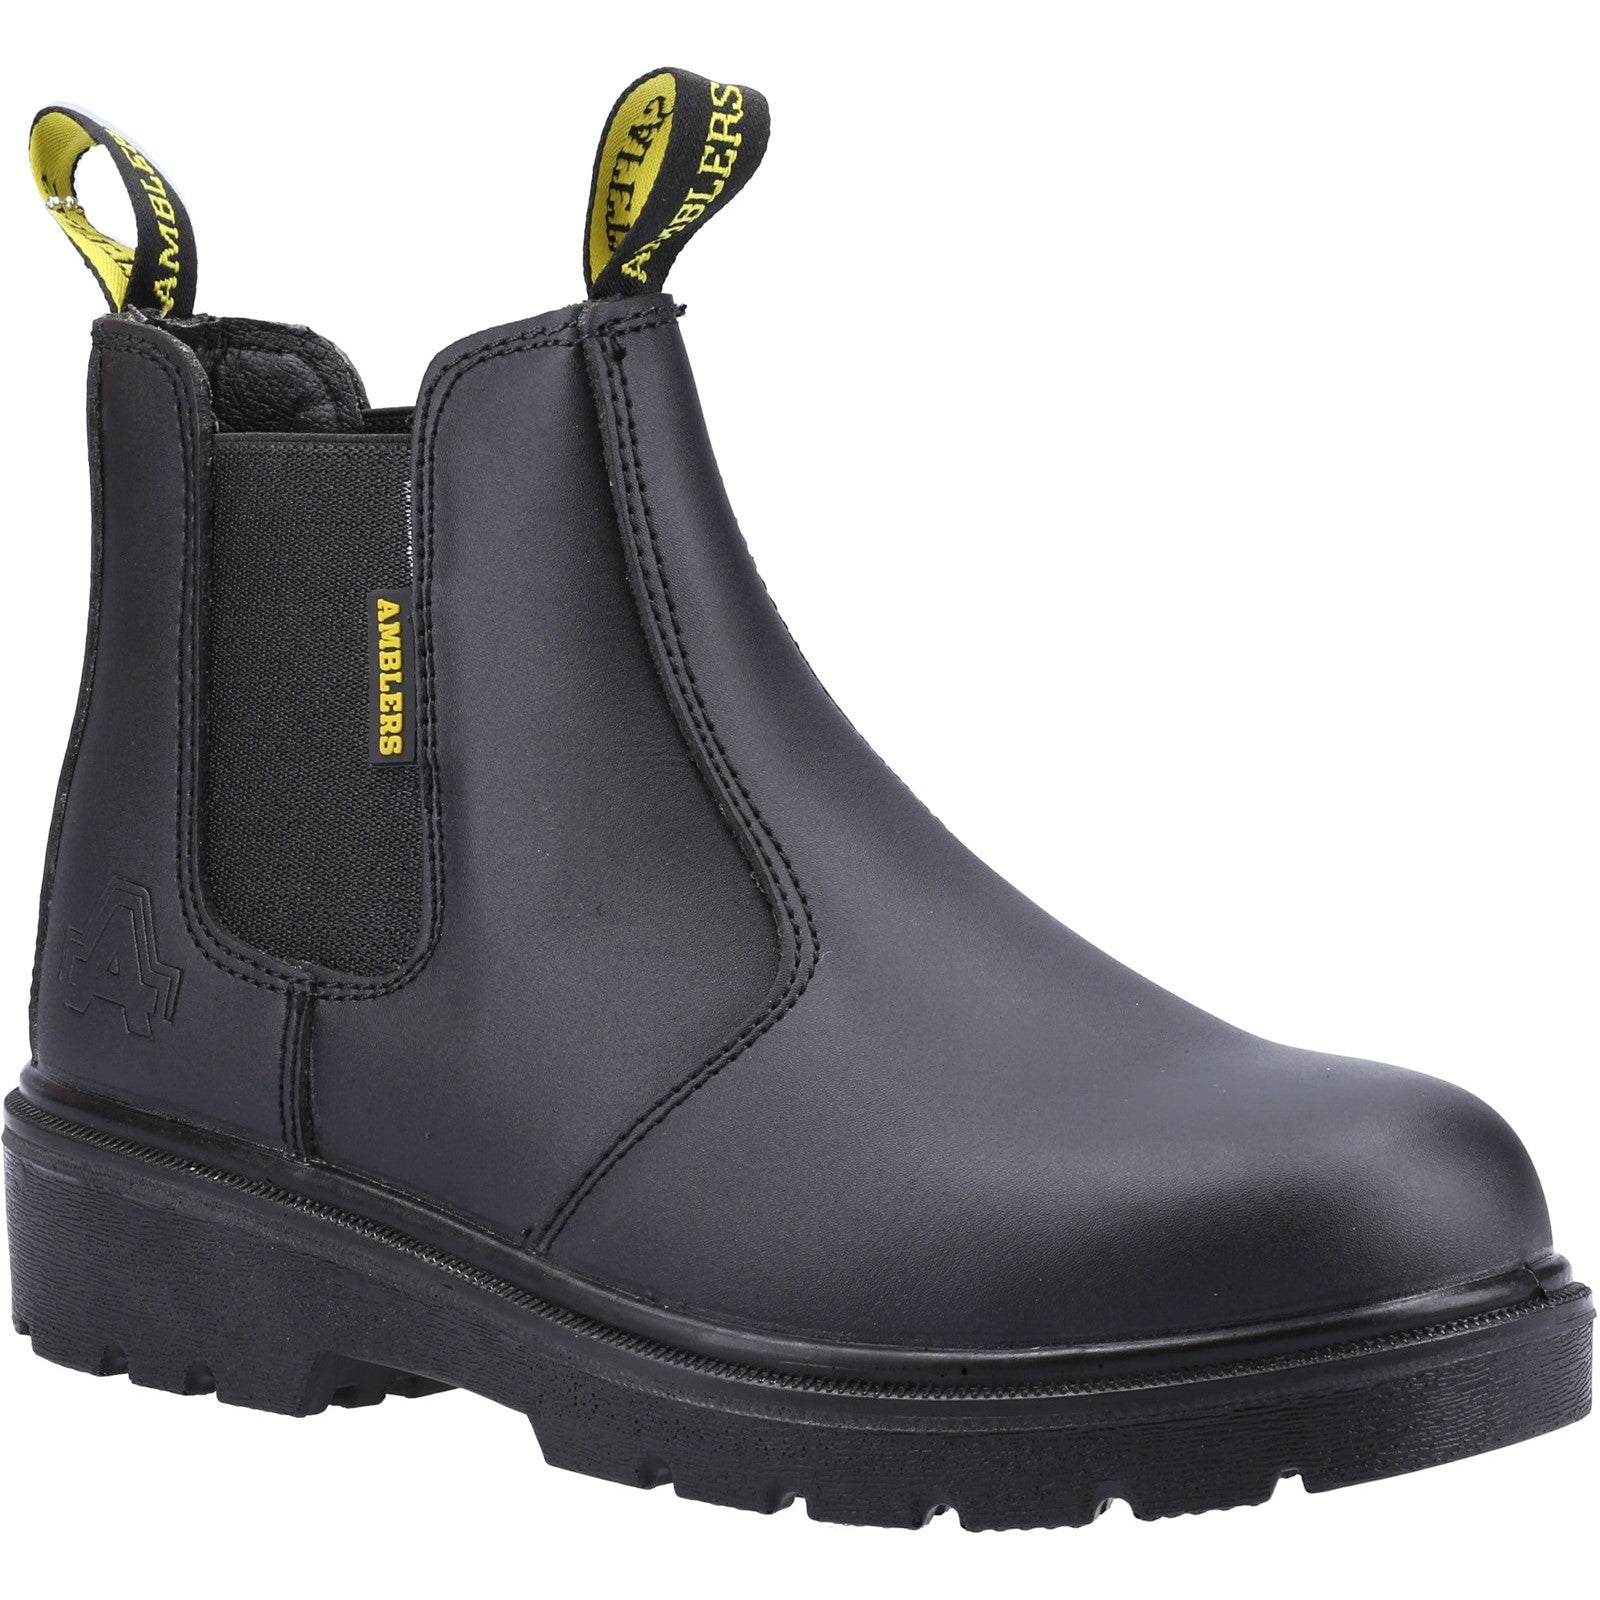 FS116 Dual Density Pull on Safety Dealer Boot, Amblers Safety